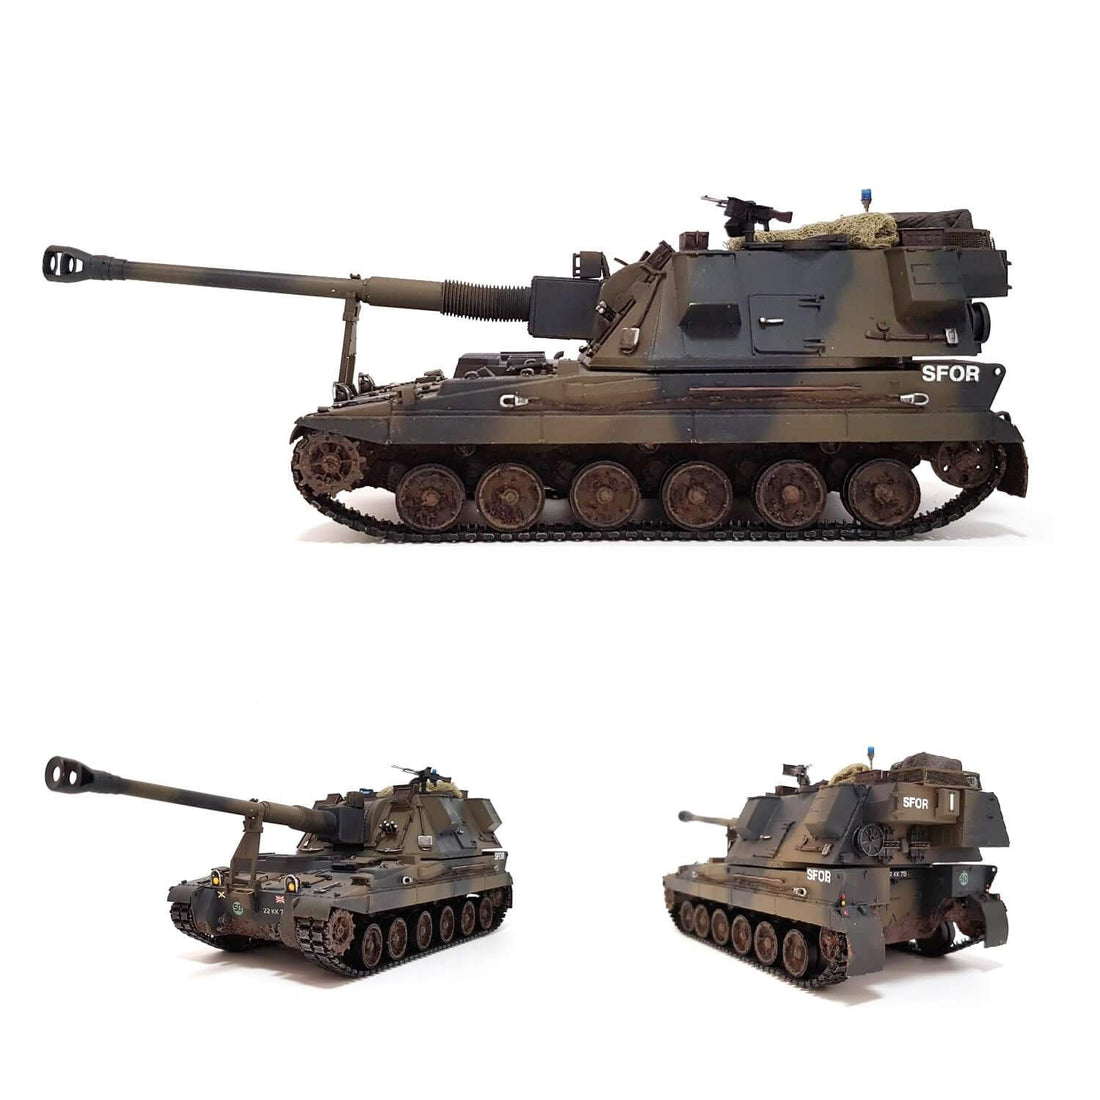 1:35 British AS-90 155 mm Self-propelled Howitzer from TRUMPETER